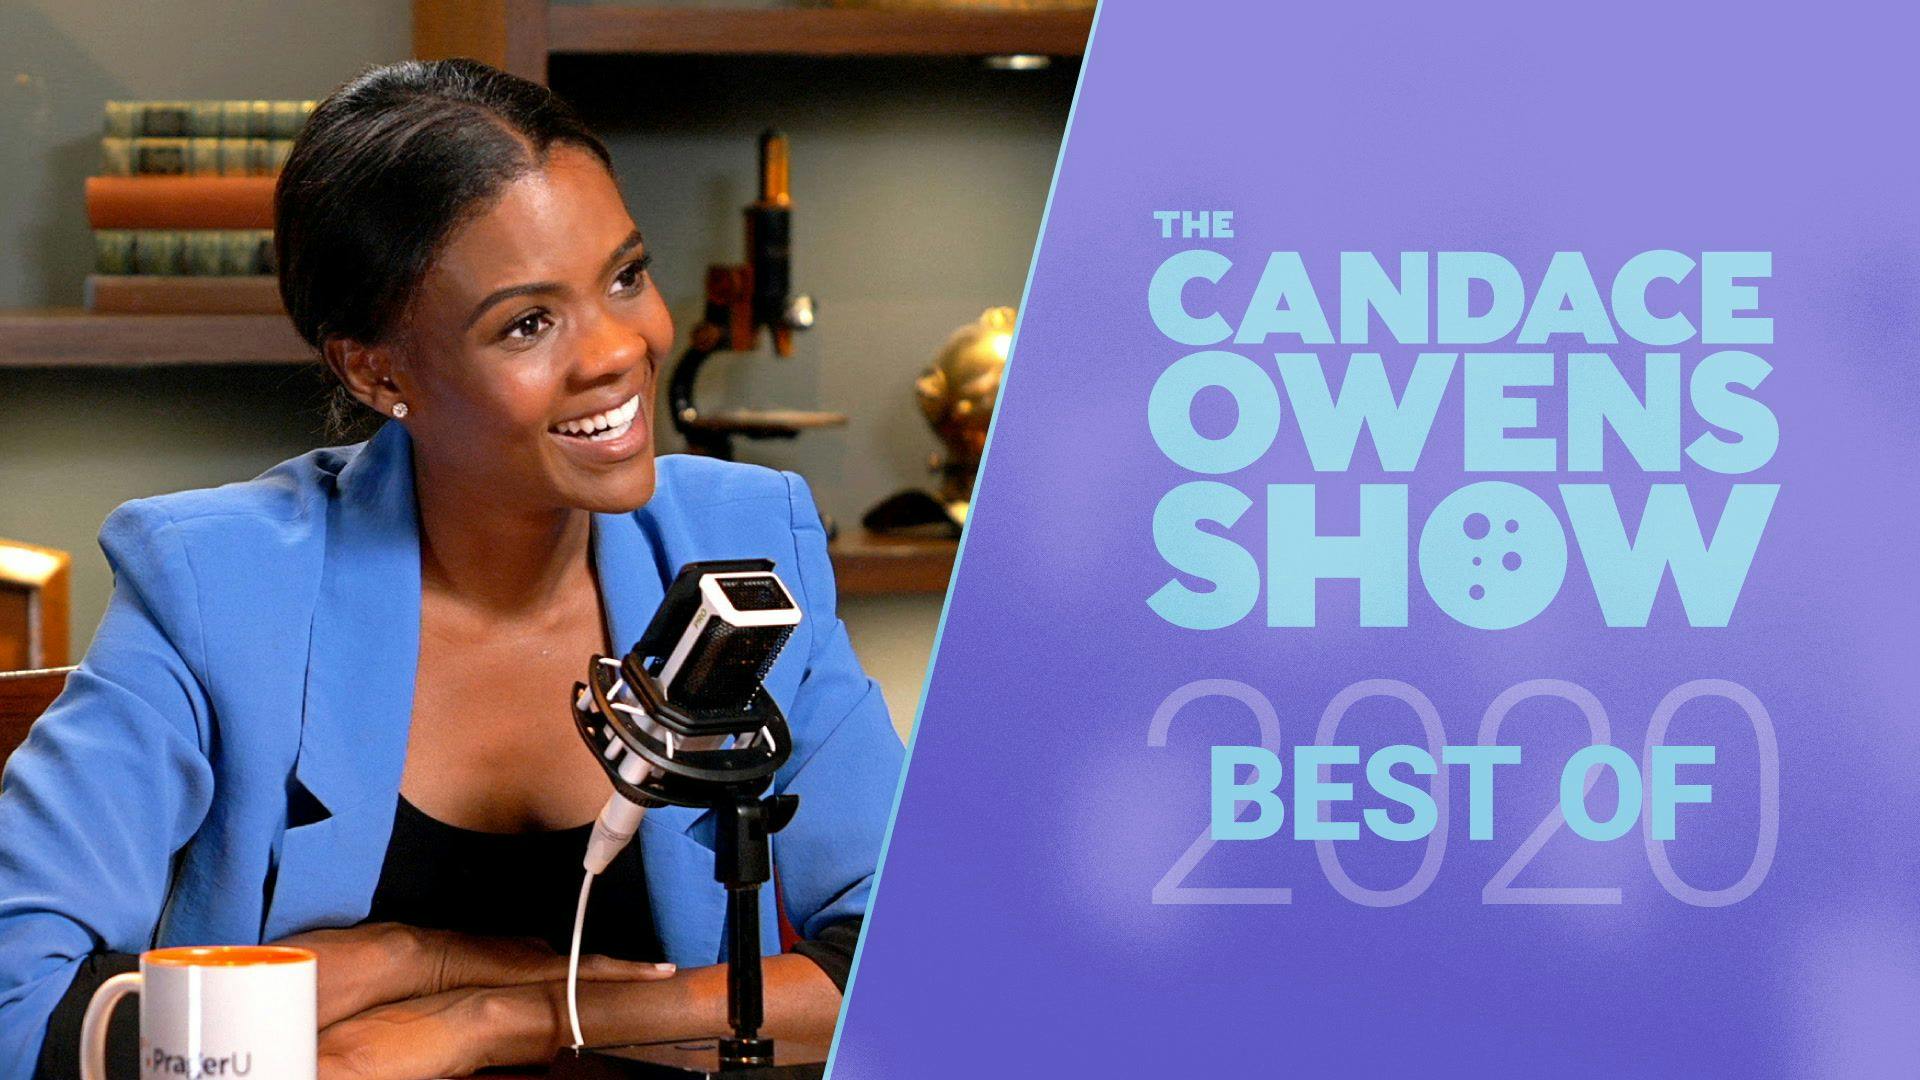 Best of The Candace Owens Show 2020